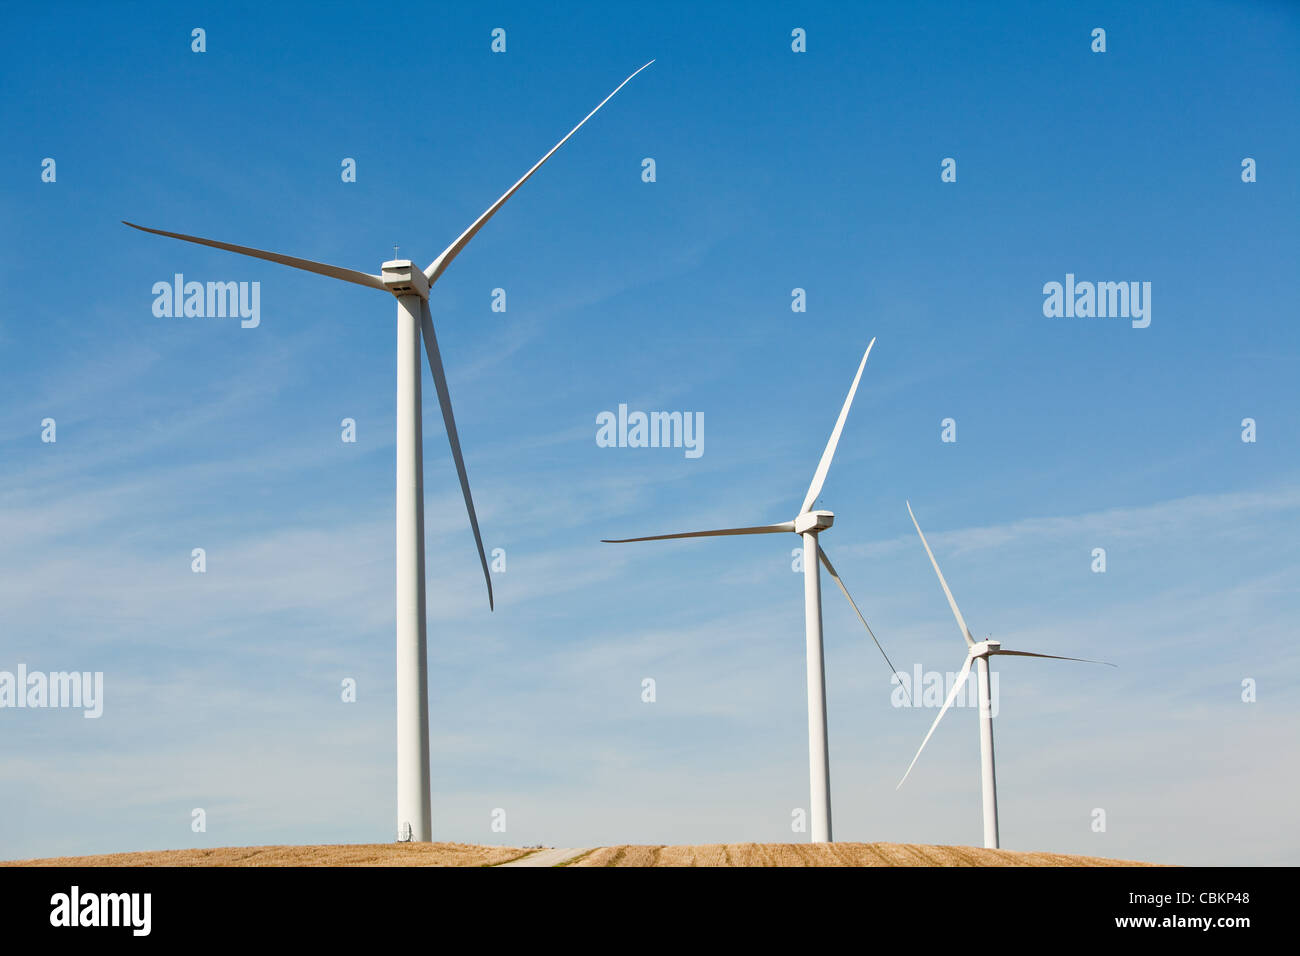 Three wind turbines side by side Stock Photo